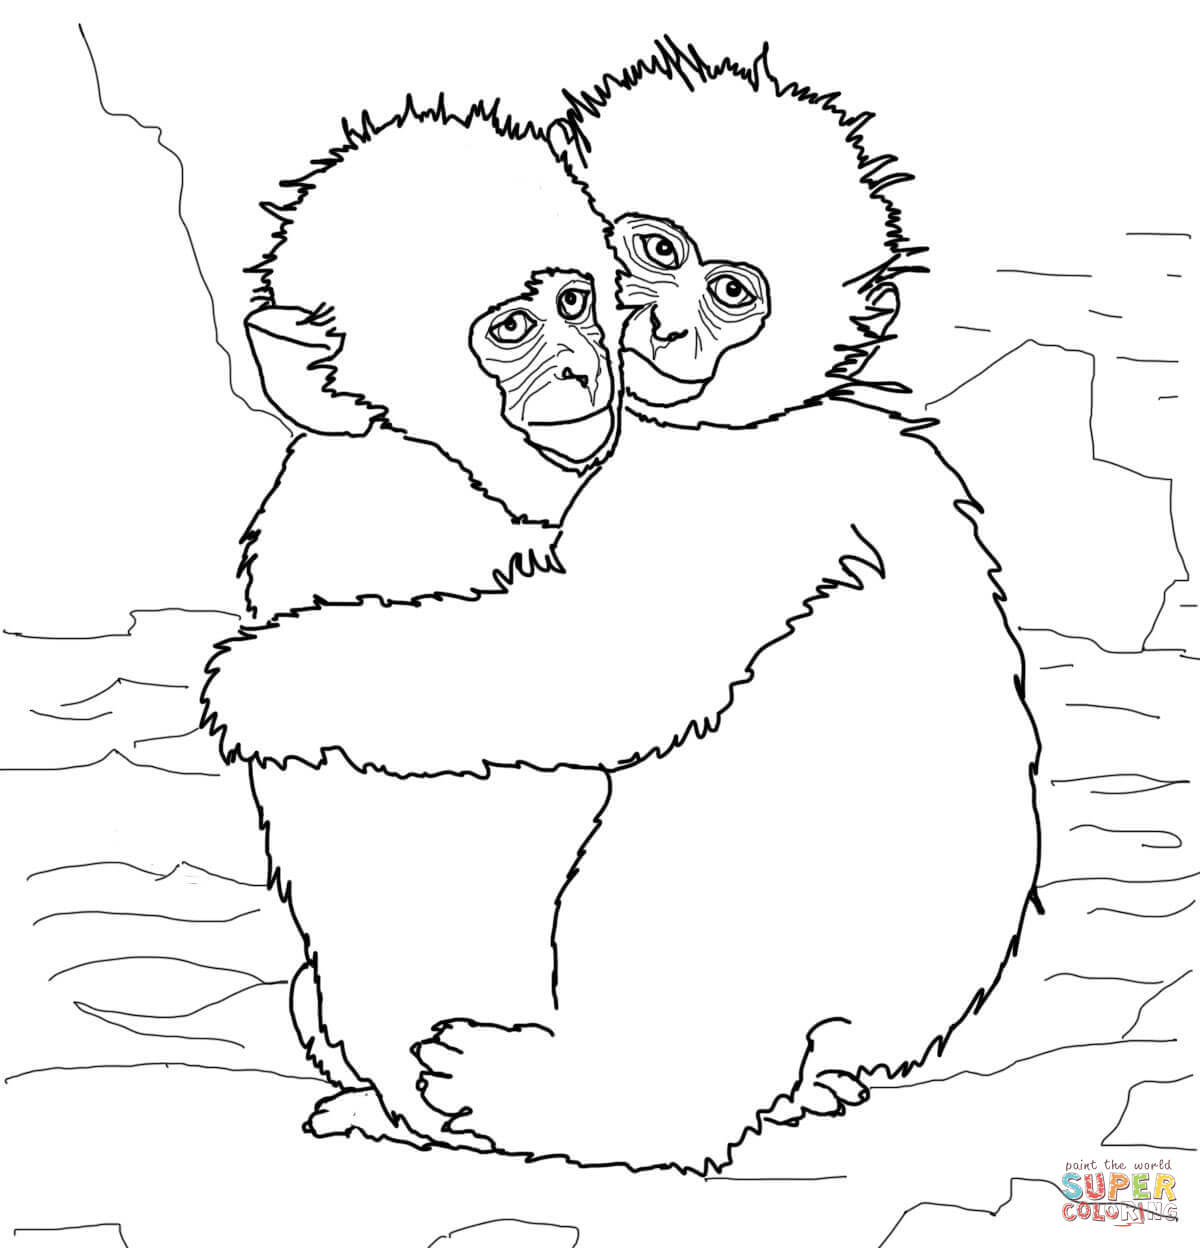 Japanese Macaque coloring #14, Download drawings